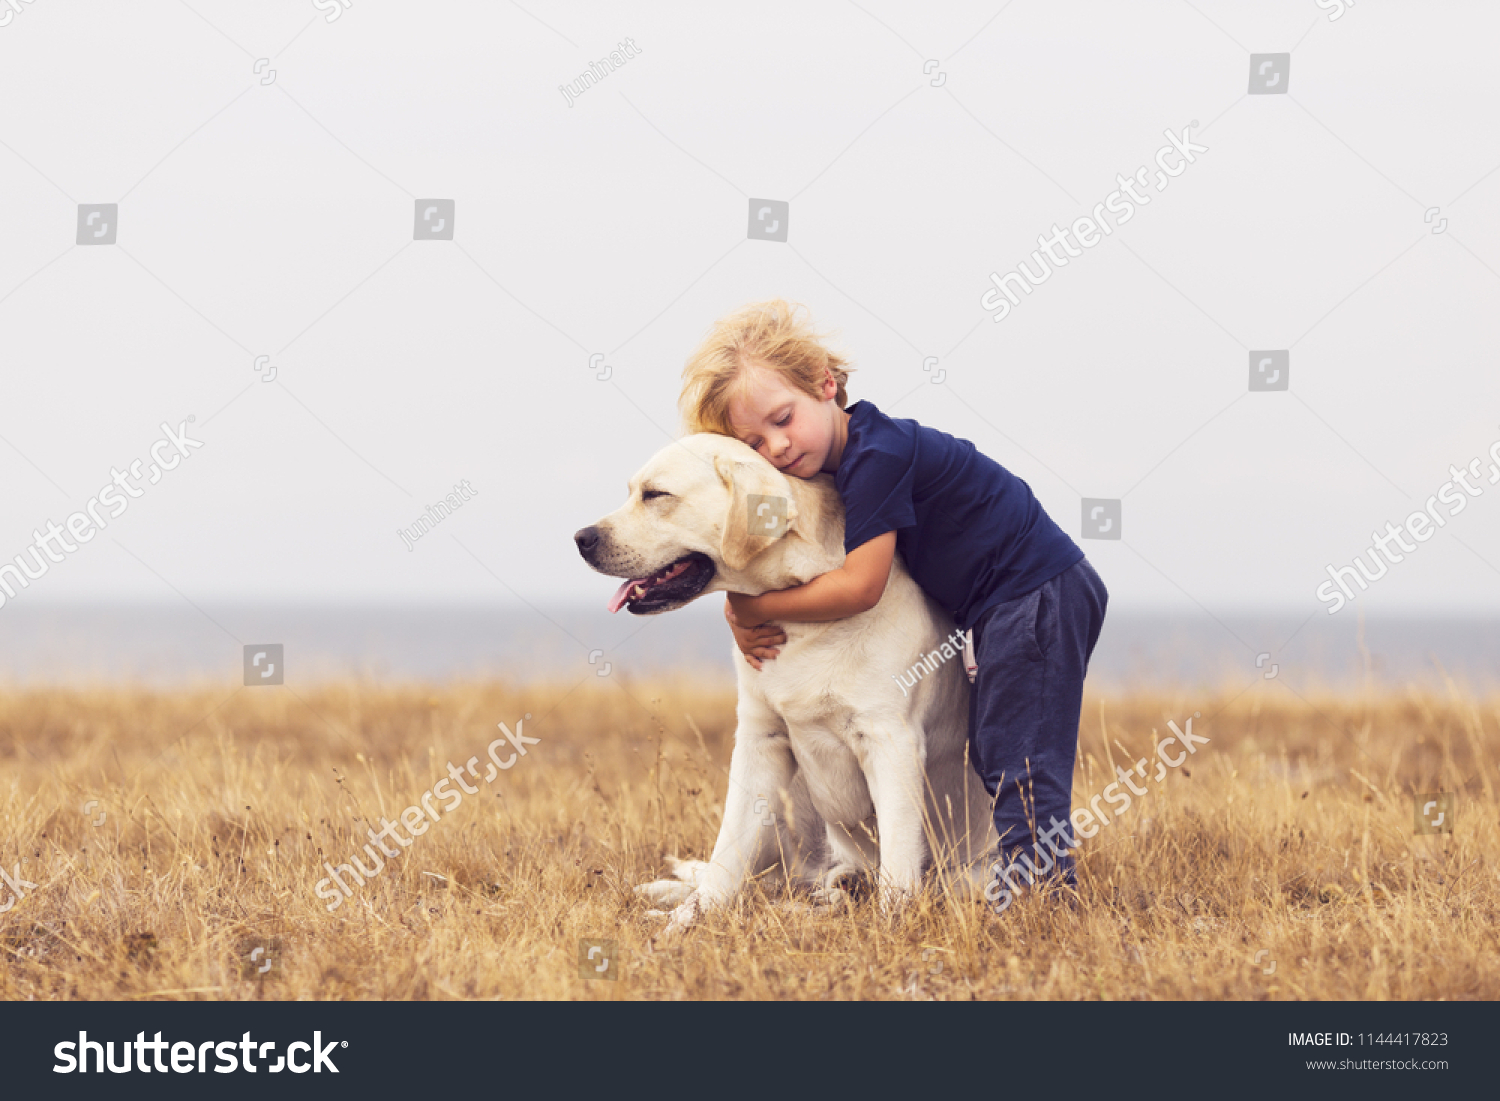 adorable boy hugging her labrador retriever. happy kid with big white dog outdoors. child and his dog best friend having fun in the garden. toddler boy with cute family dog.  #1144417823